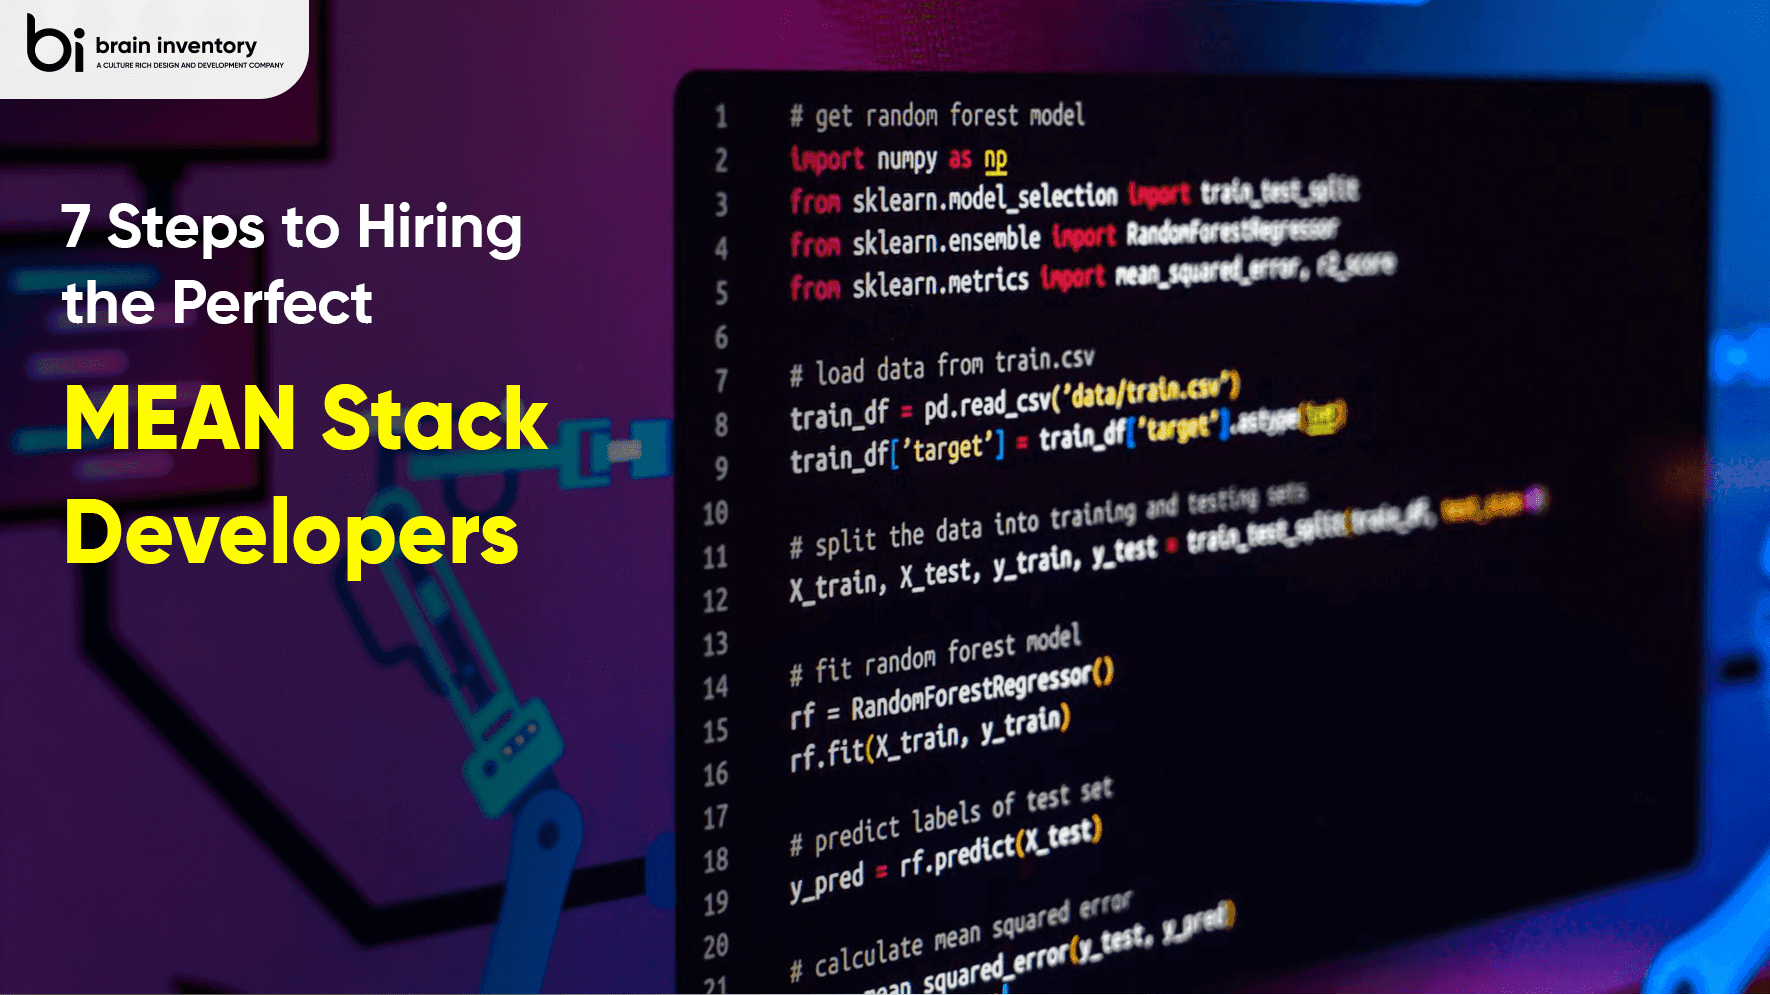 7 Steps to Hiring the Perfect MEAN Stack Developers